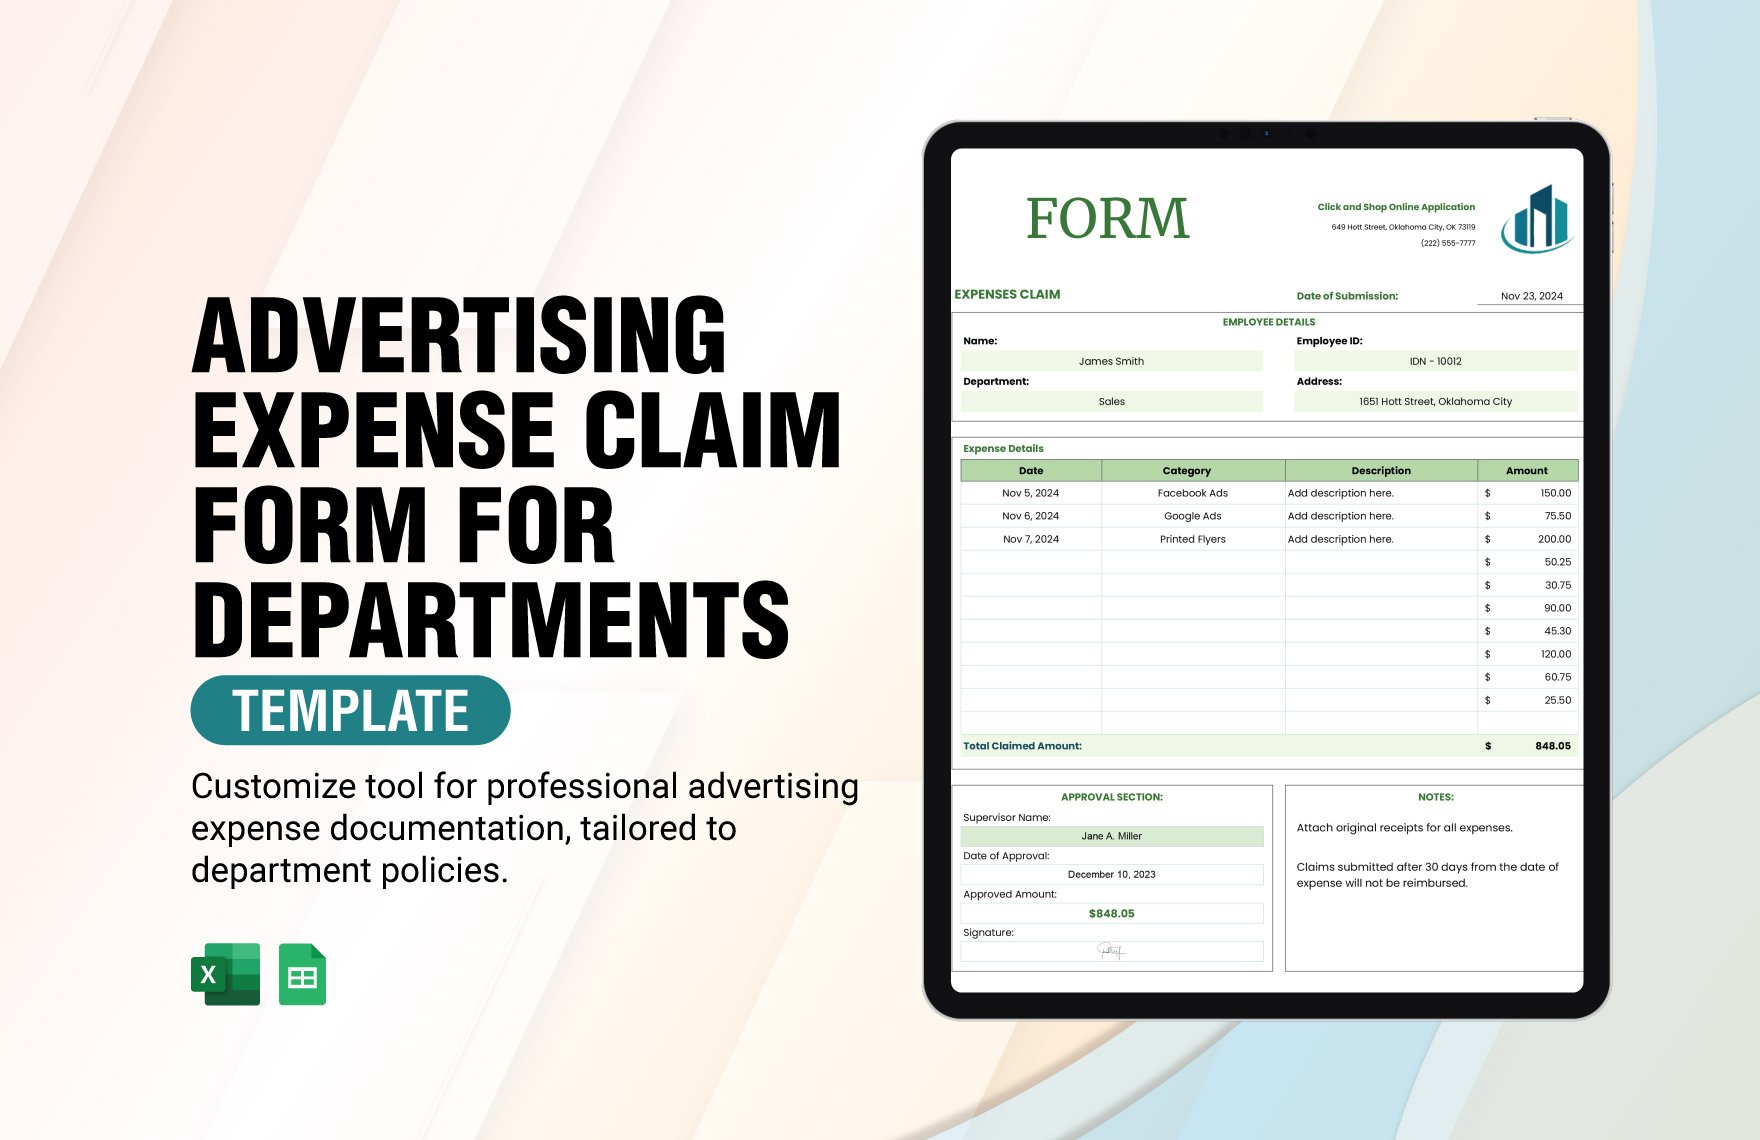 Advertising Expense Claim Form for Departments Template in Excel, Google Sheets